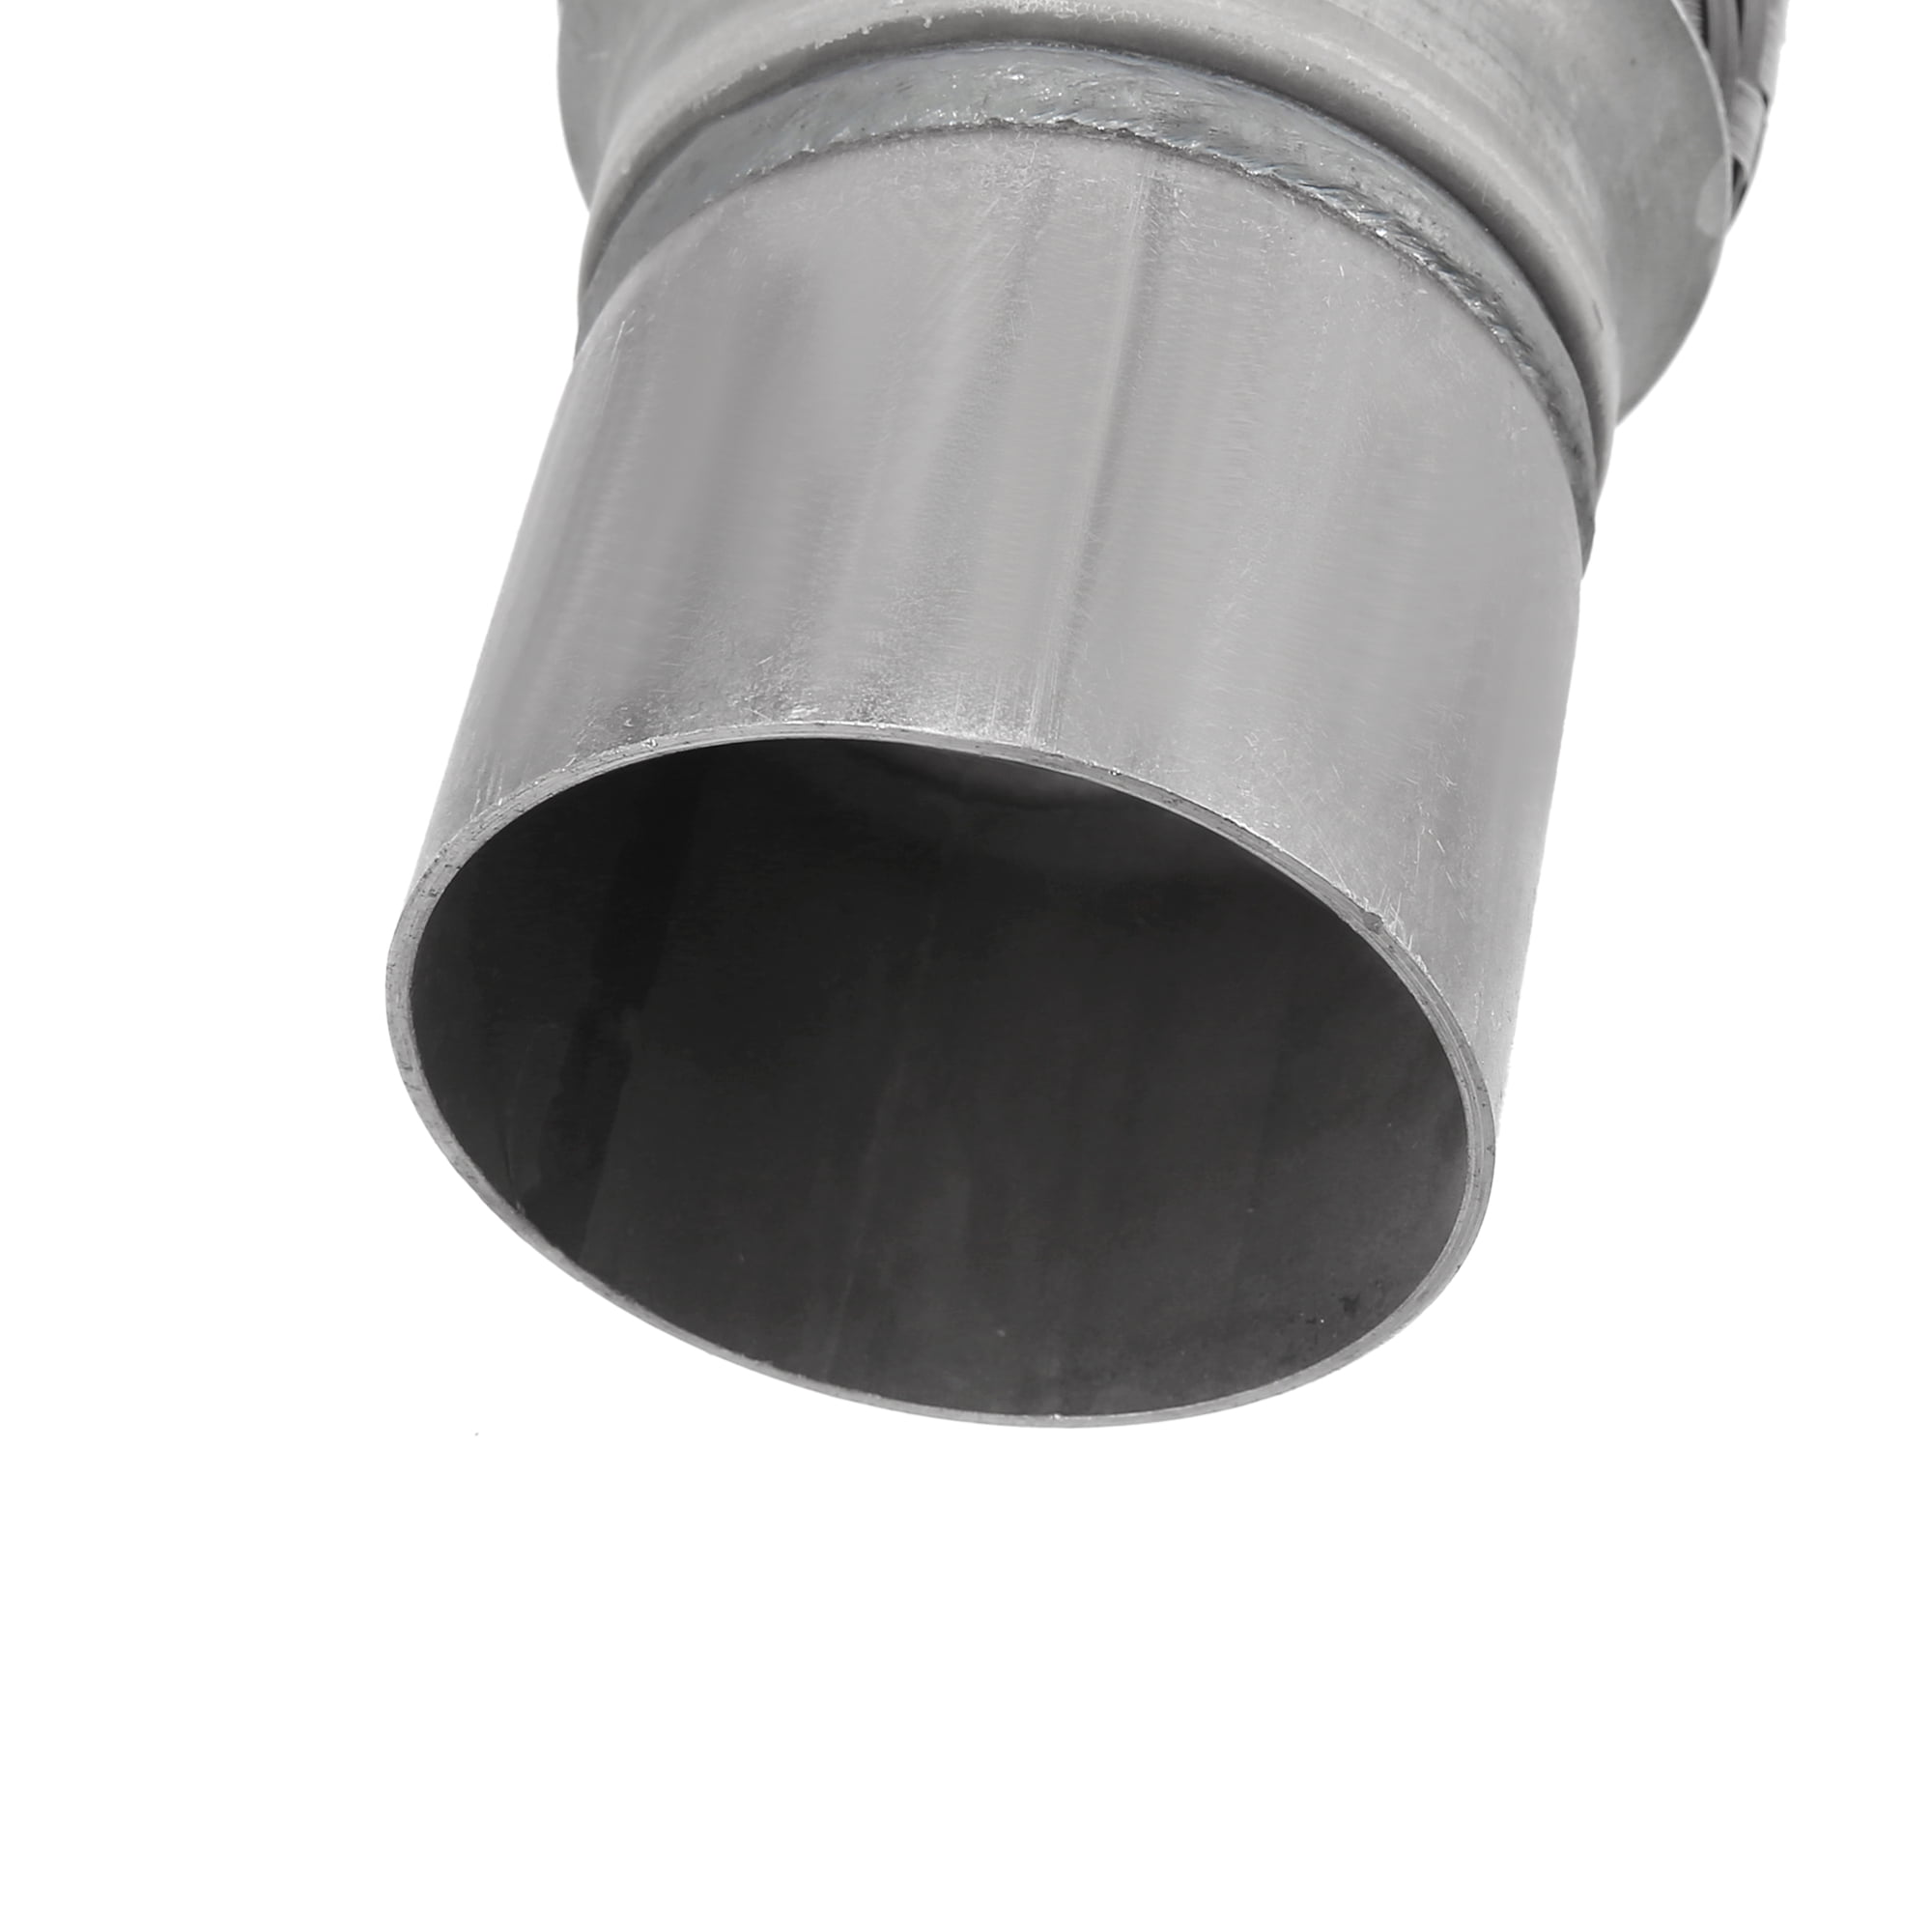 LHCER Flexible Joint Tube,2 X 6in Car Exhaust Flexible Pipe Stainless Steel  Weld Joint Tube Auto Accessories,Car Accessories 